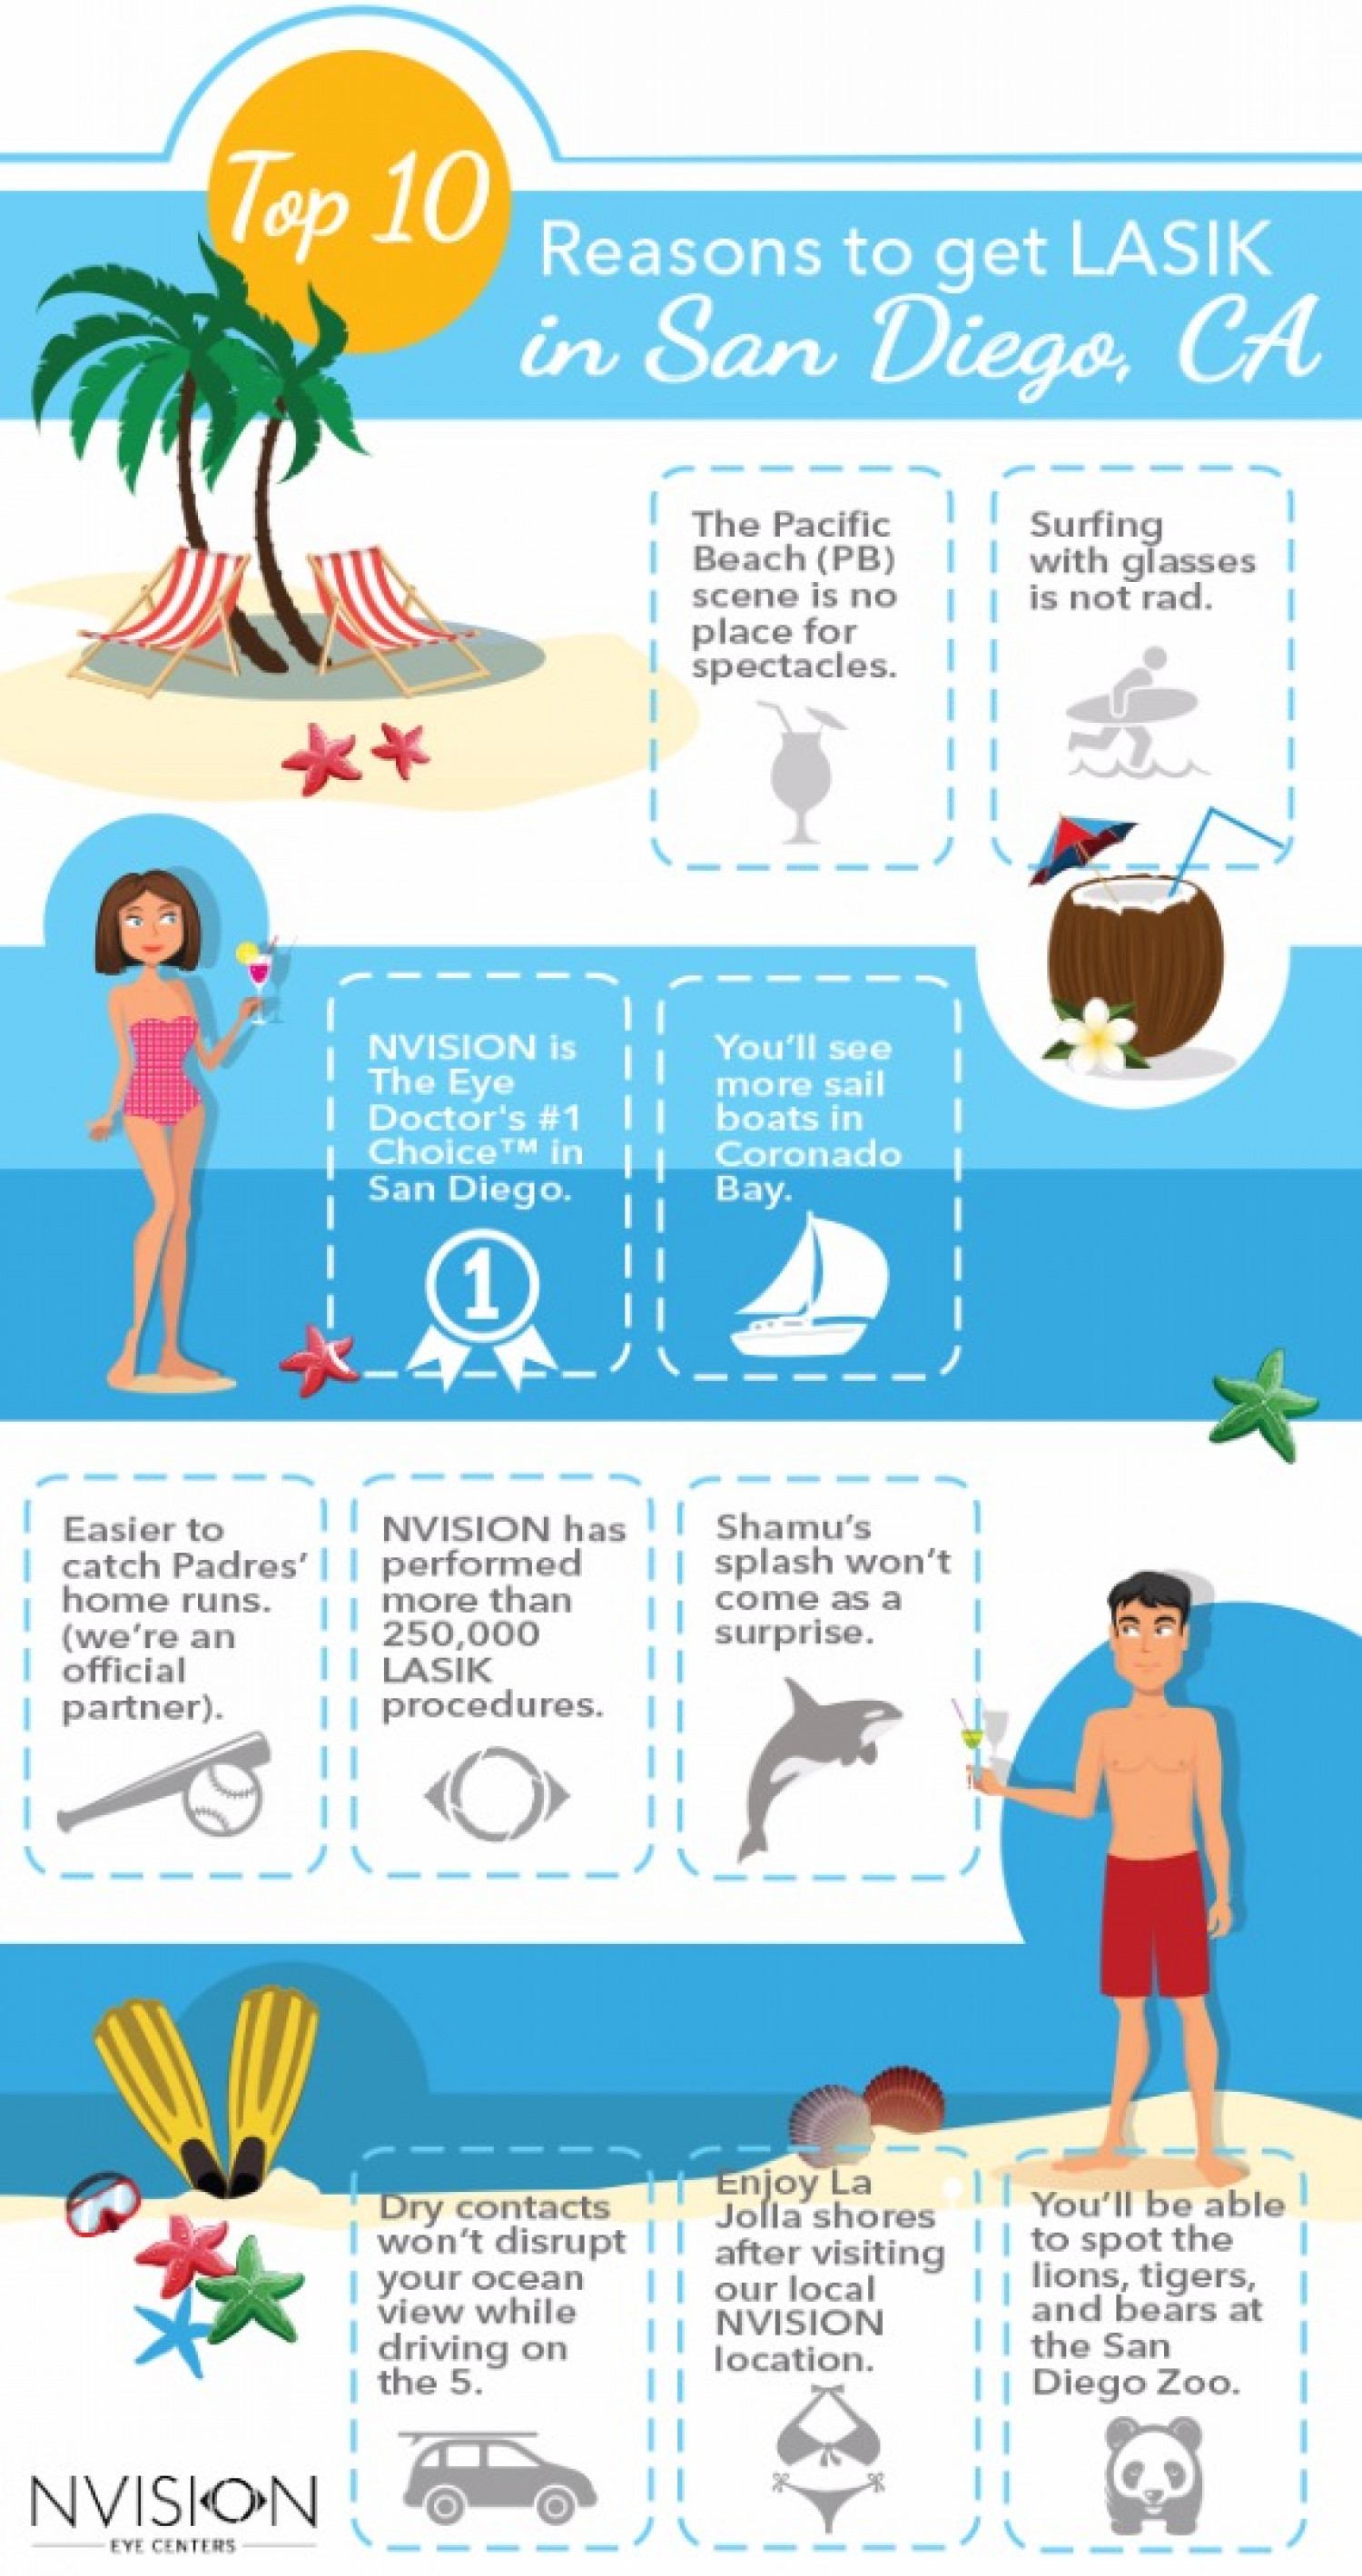 TOP 10 REASONS TO GET LASIK IN SAN DIEGO Infographic